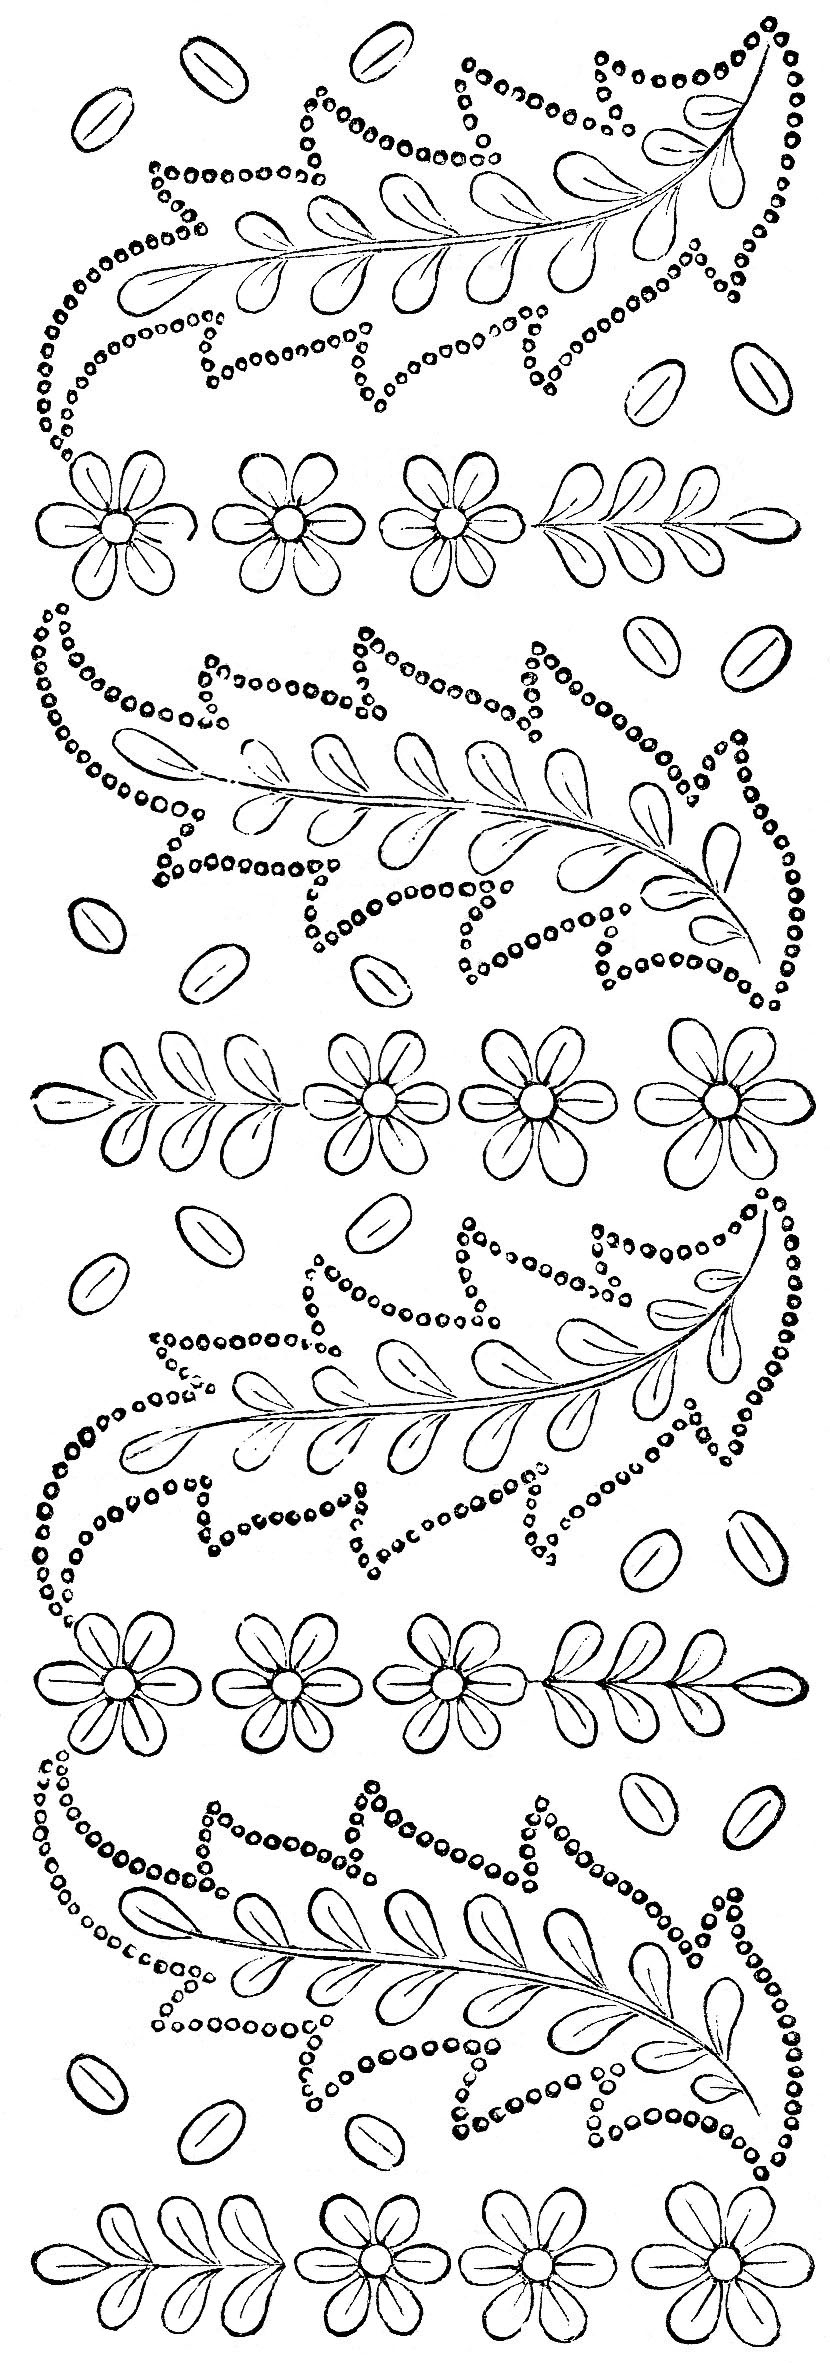 Hand Stitch Embroidery Patterns Free Vintage Embroidery Pattern For Hand Stitching Vintage Crafts